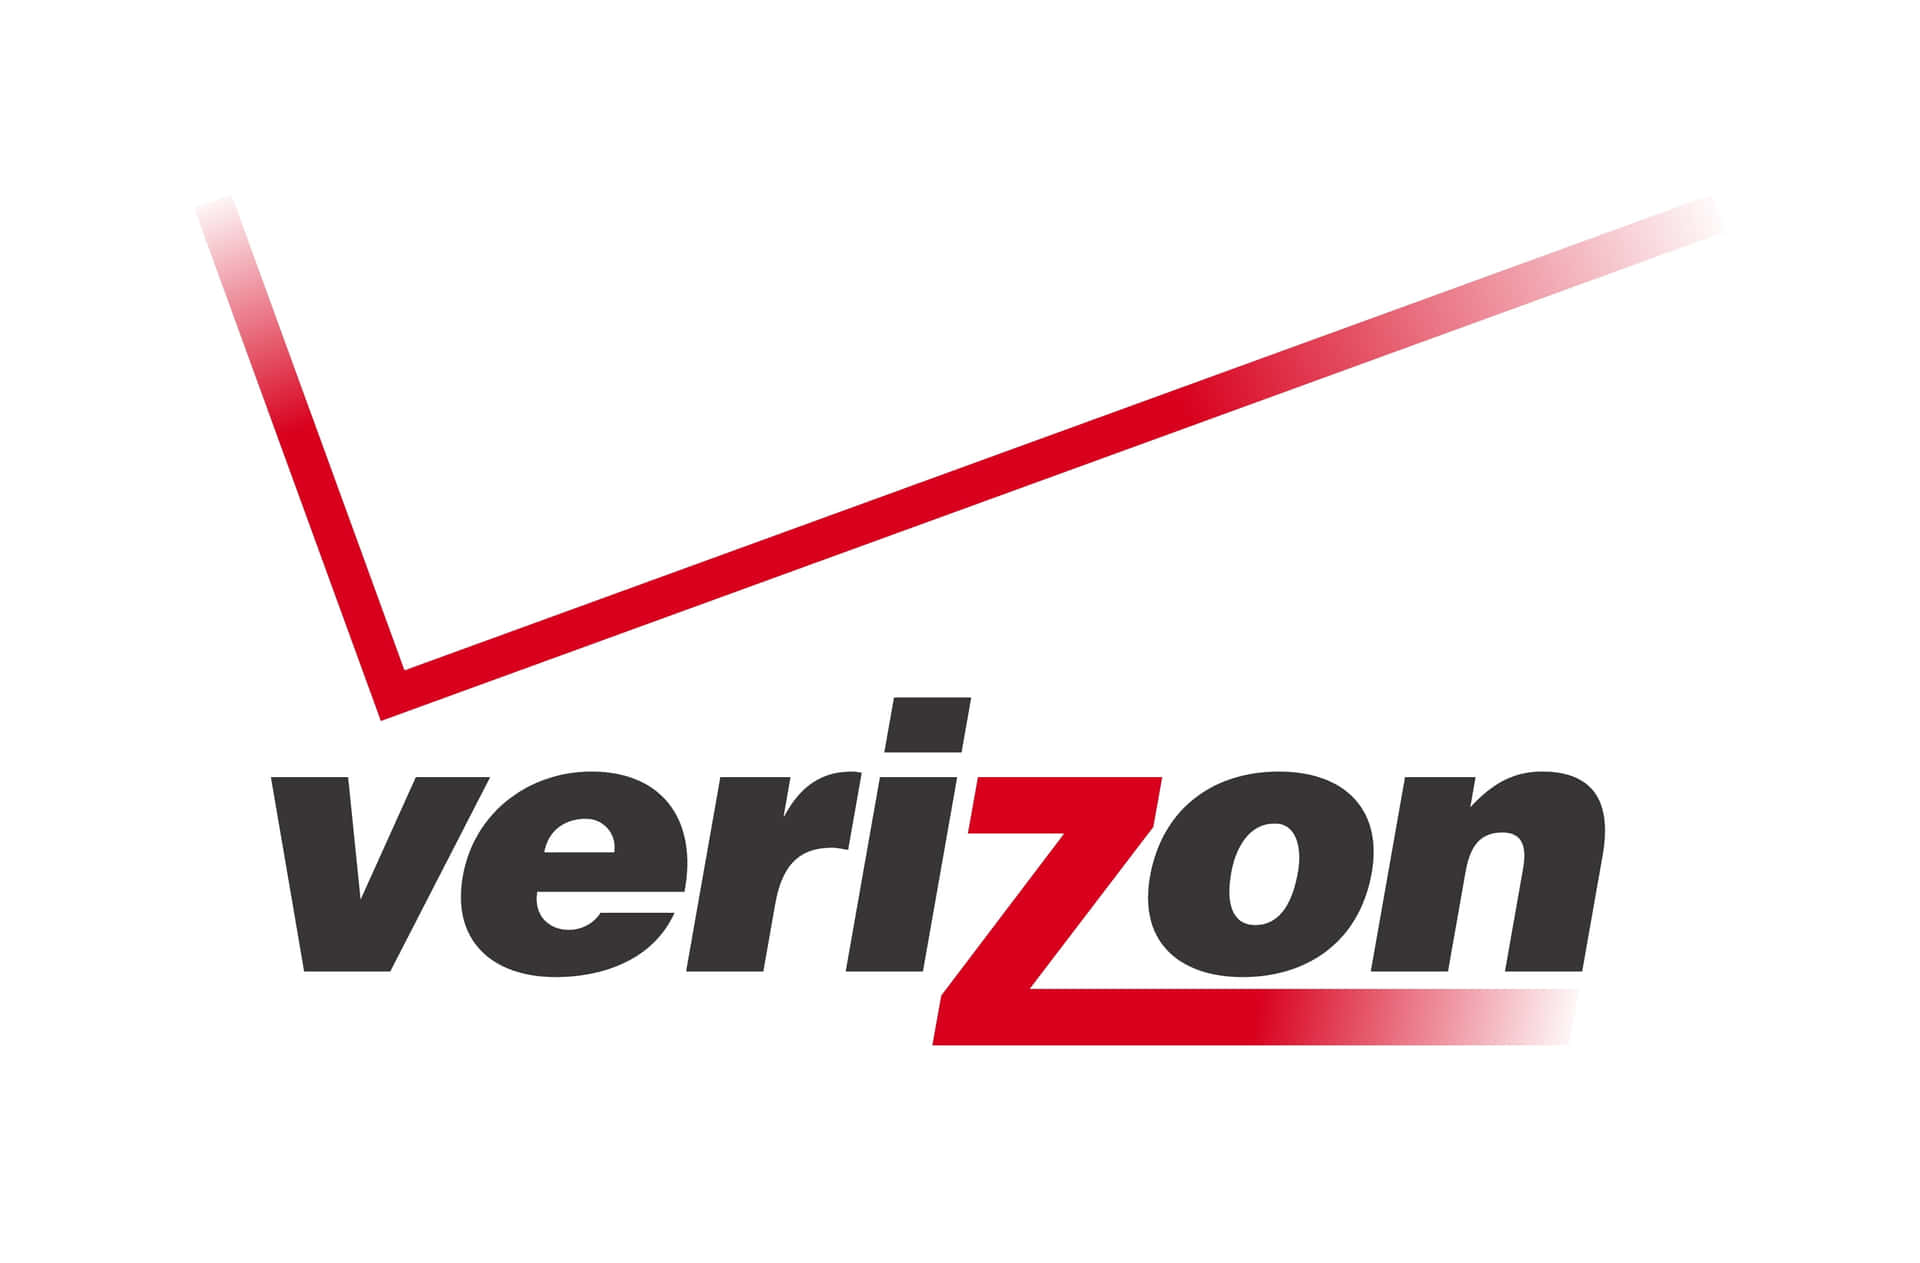 Enjoying the quick and reliable connectivity of Verizon